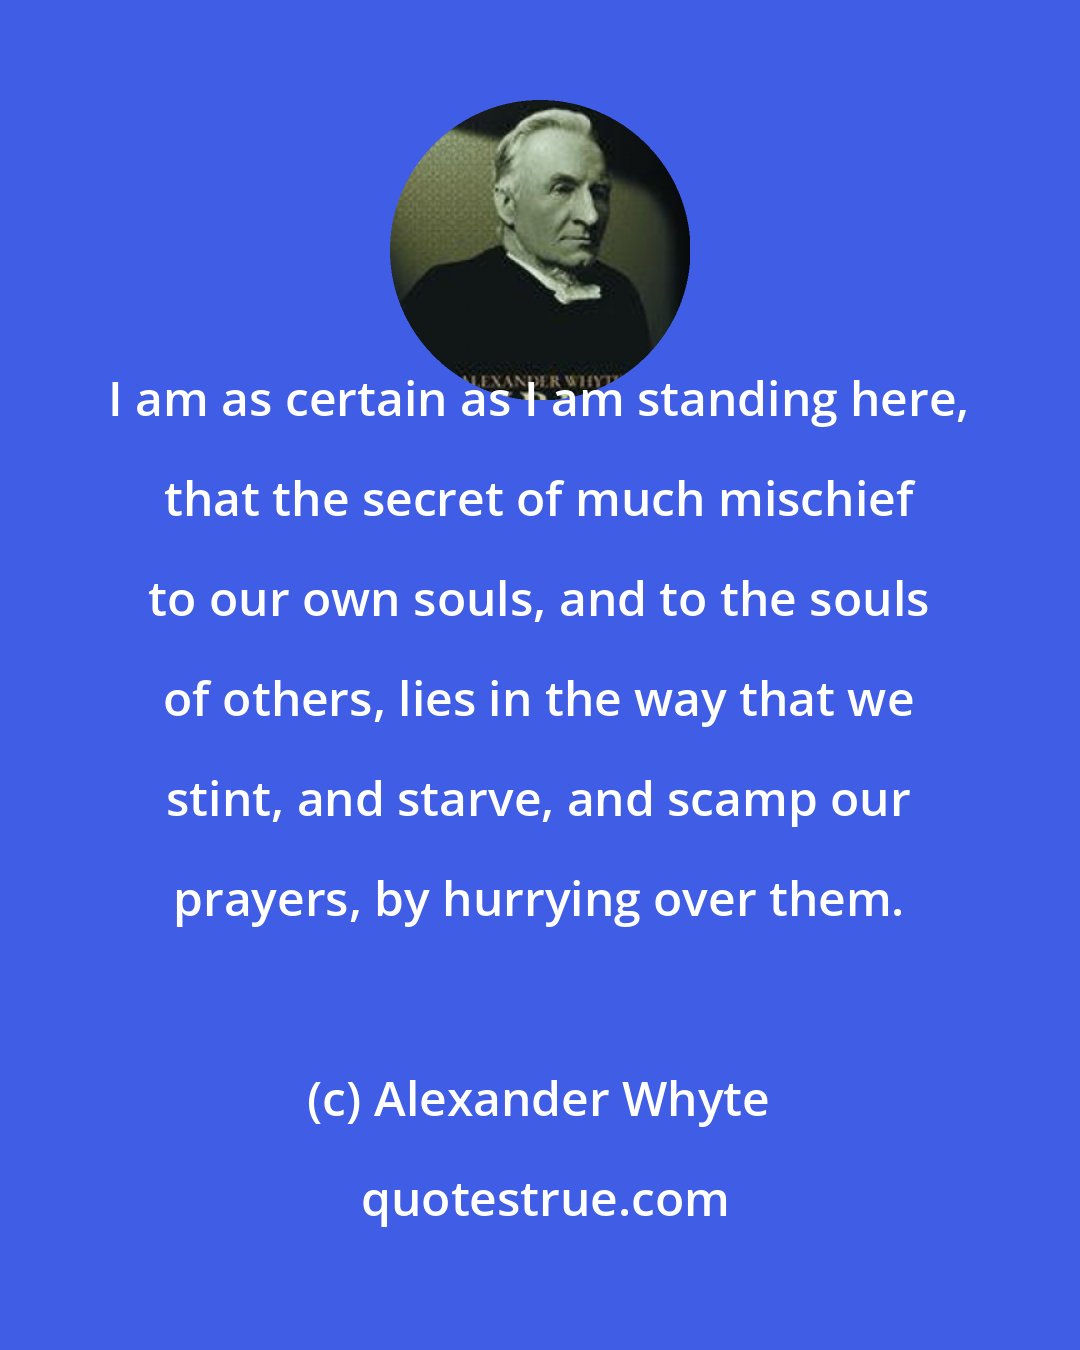 Alexander Whyte: I am as certain as I am standing here, that the secret of much mischief to our own souls, and to the souls of others, lies in the way that we stint, and starve, and scamp our prayers, by hurrying over them.